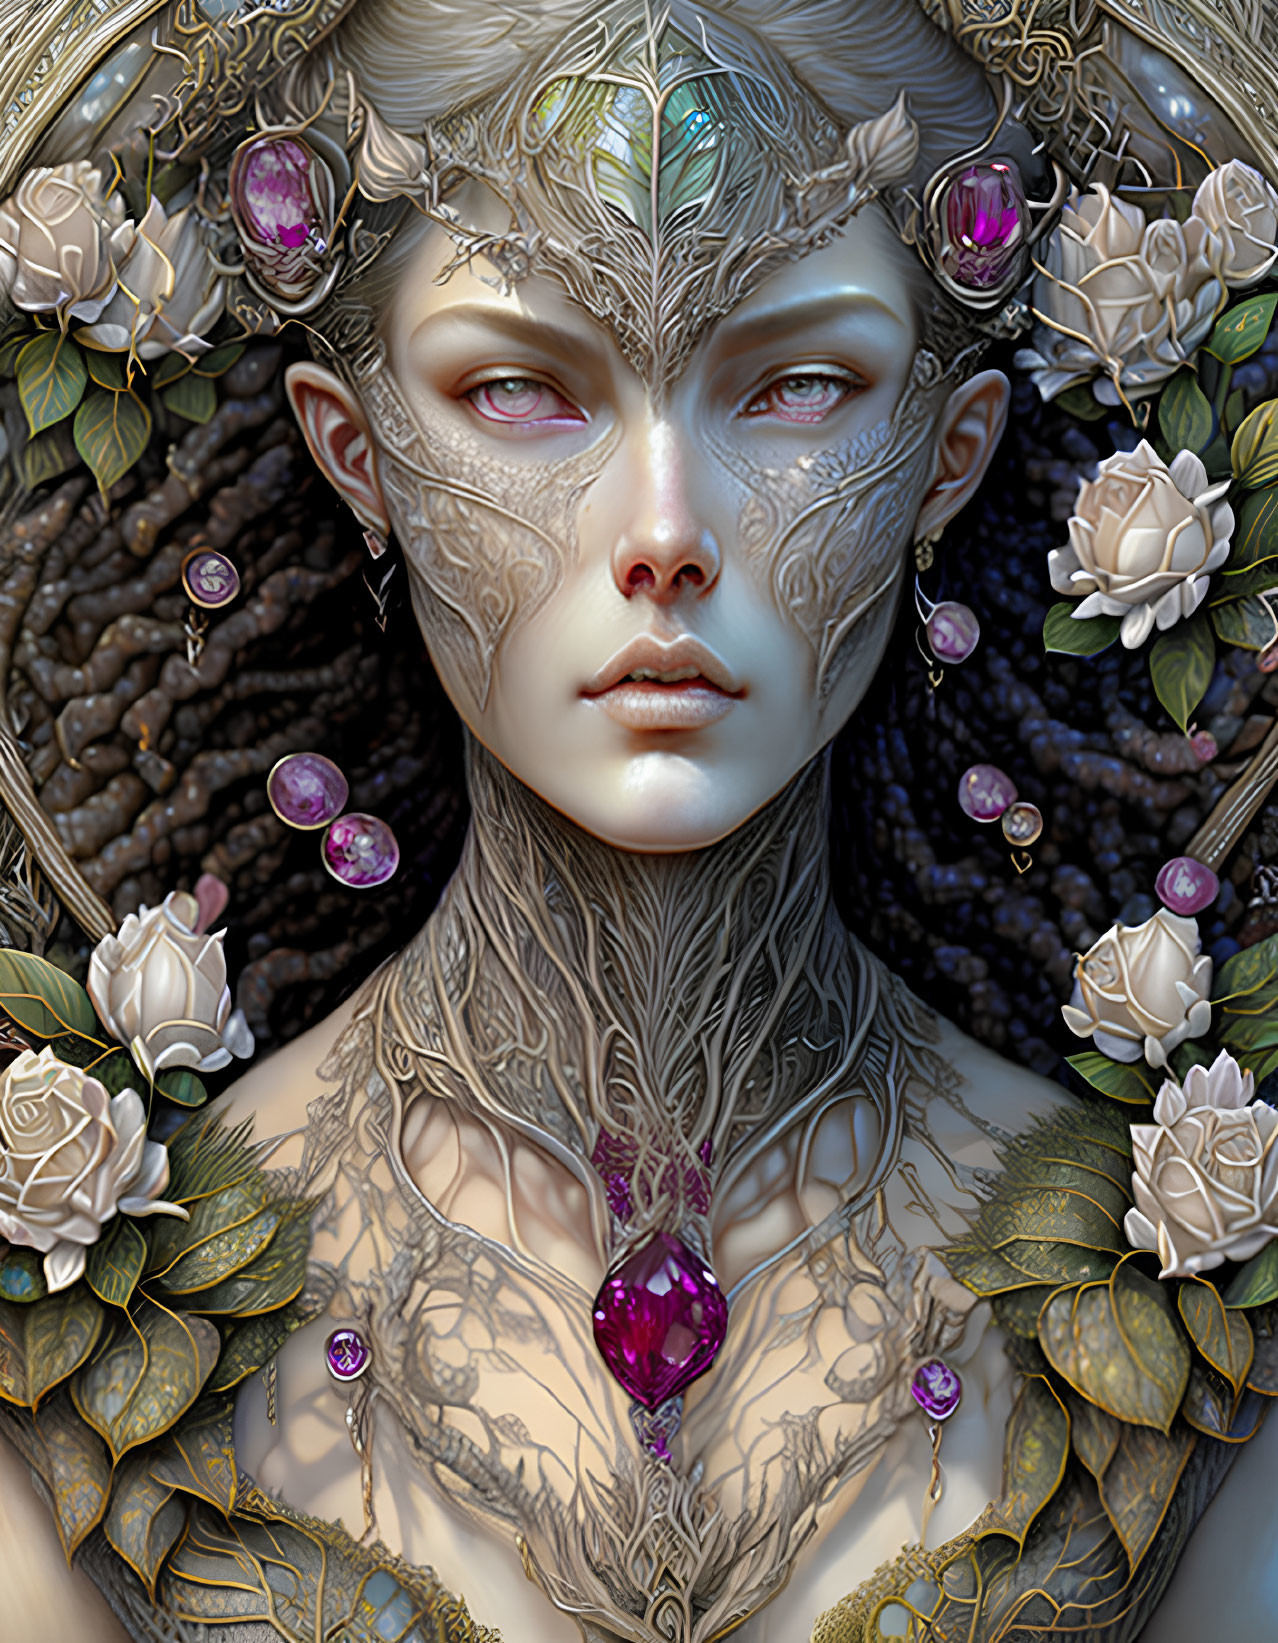 Fantastical portrait of character with tree-like tattoos, jeweled adornments, and white roses